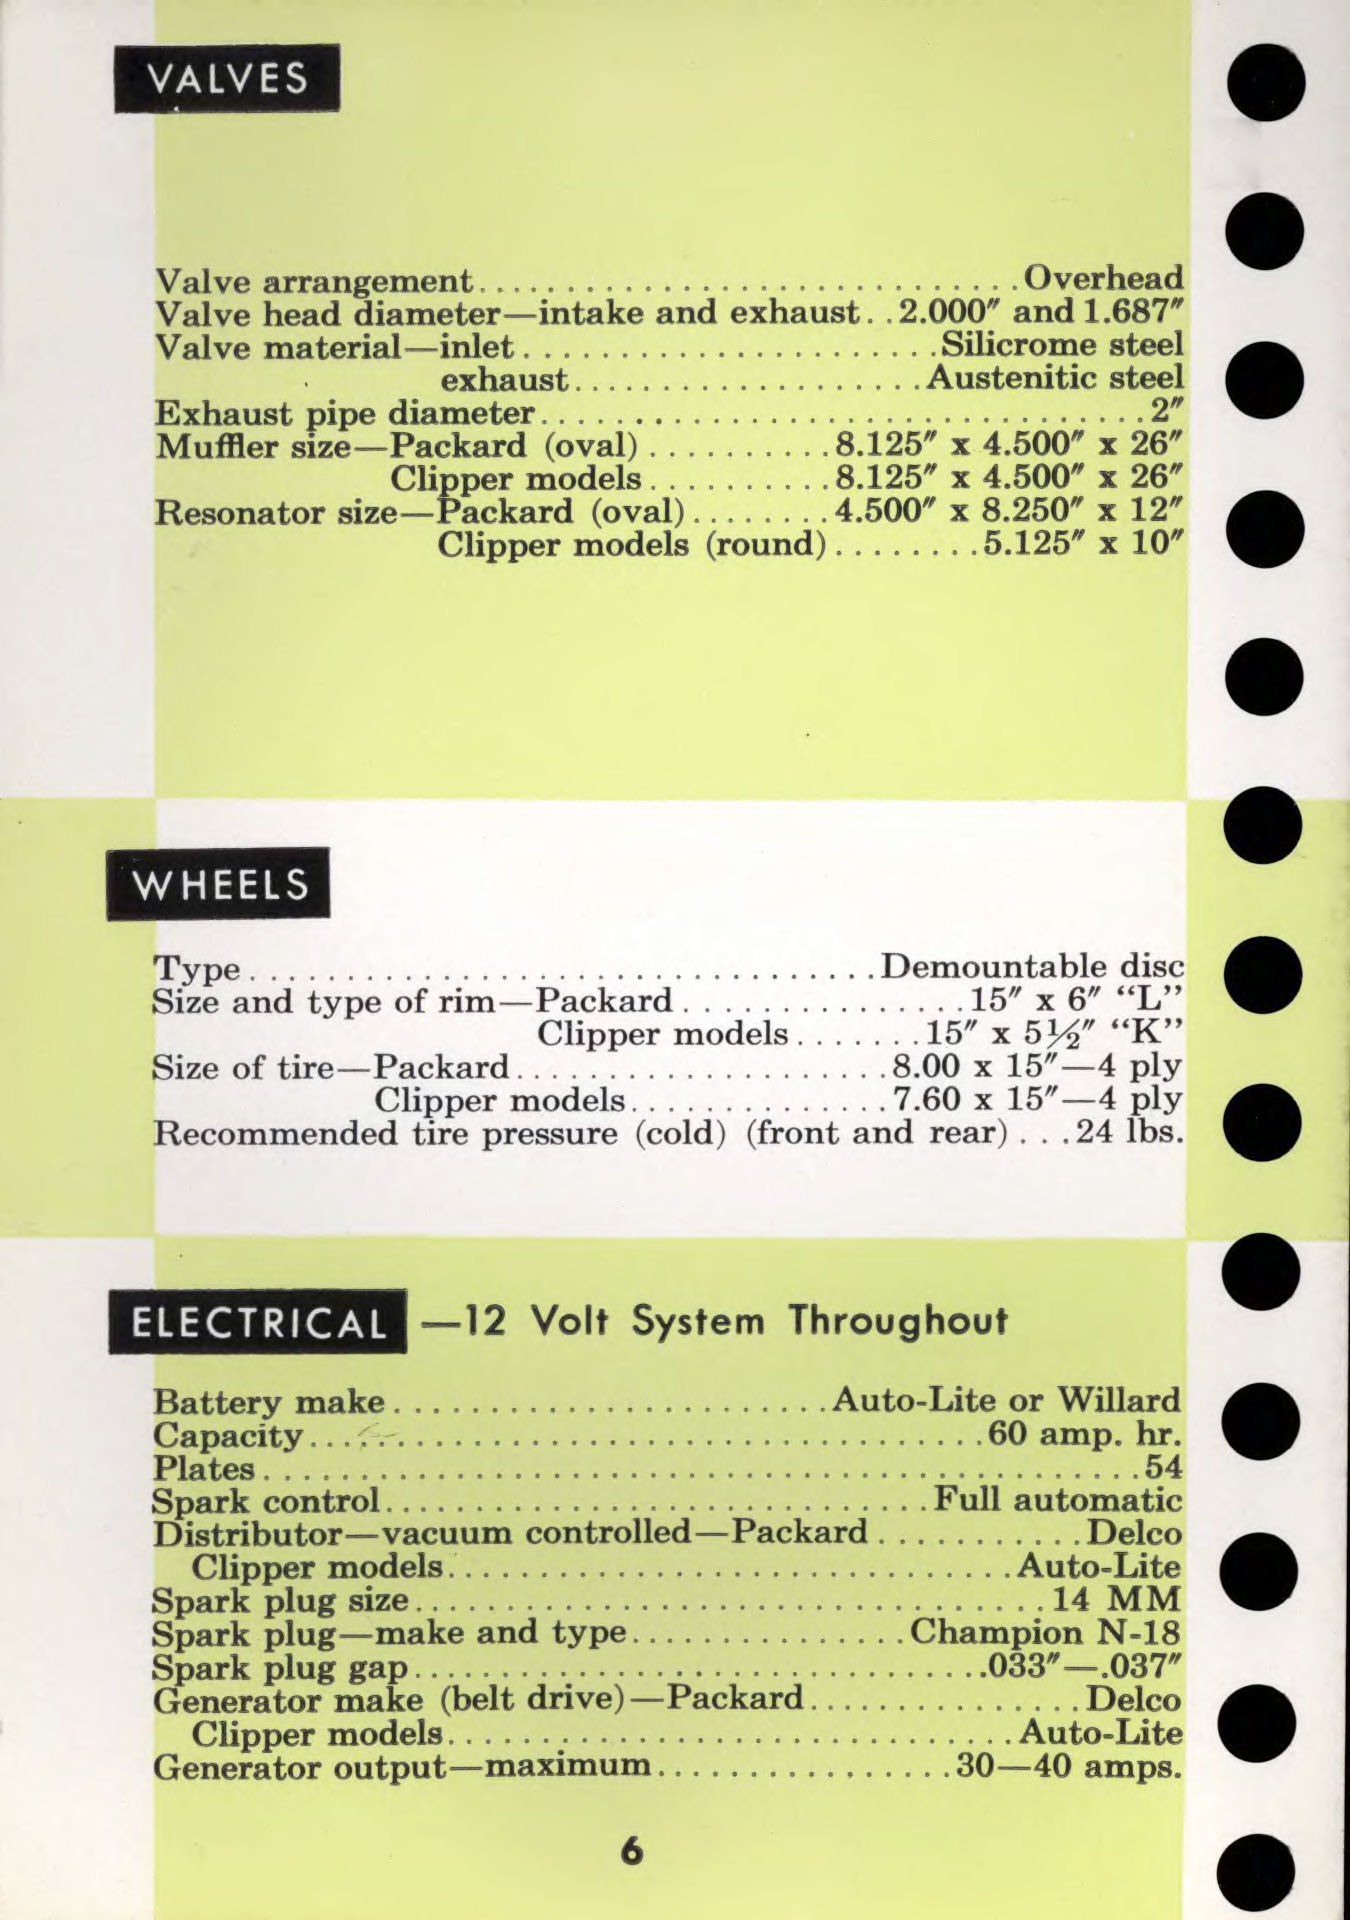 1956 Packard Data Book Page 15